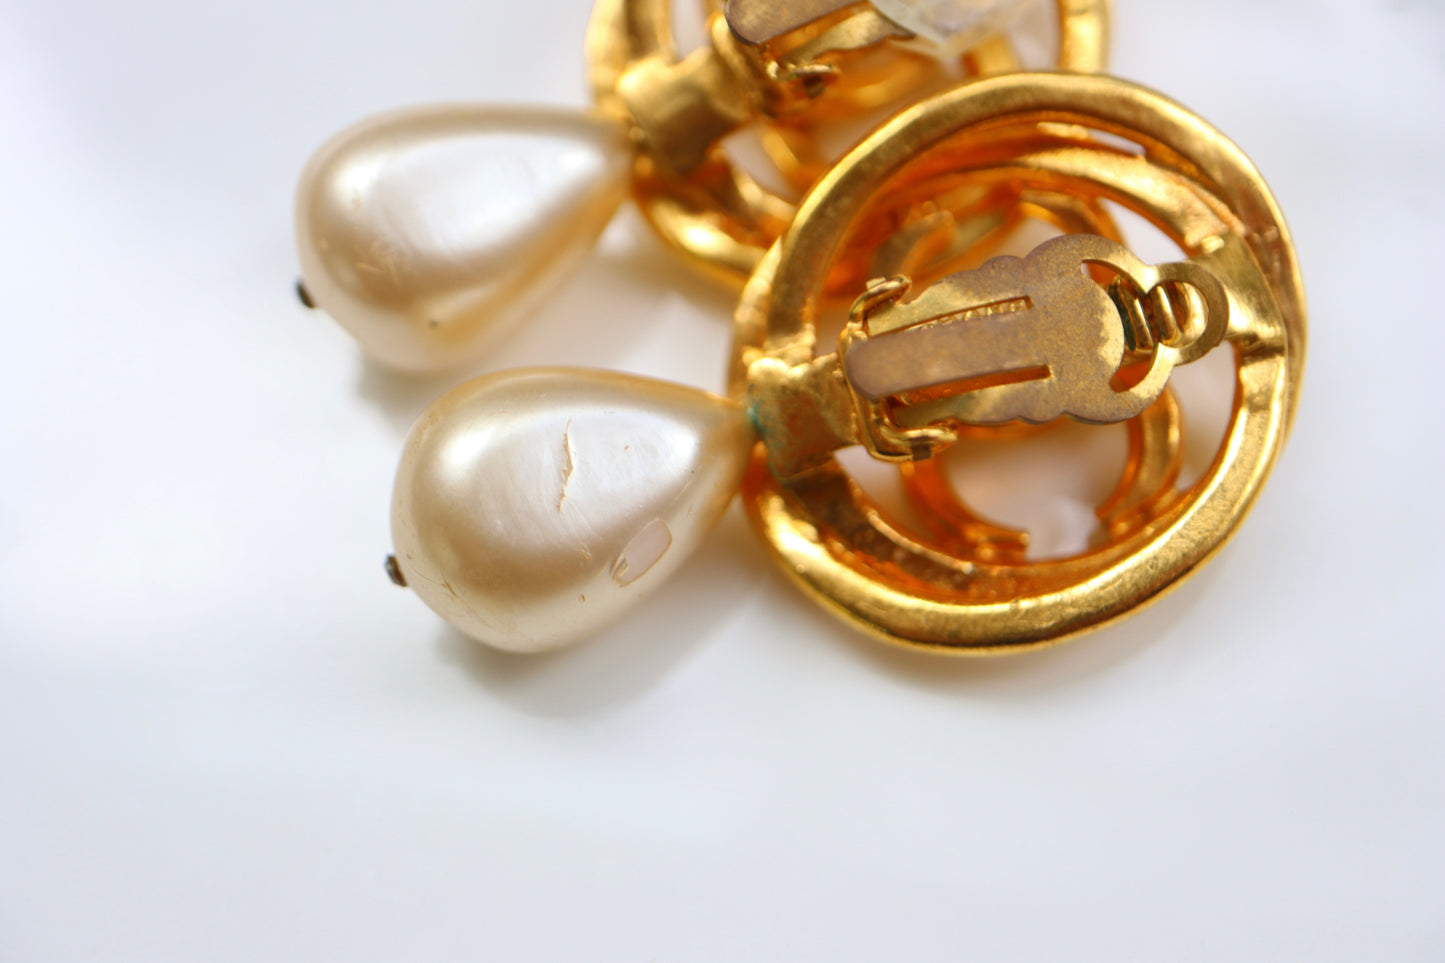 Vintage Chanel  CC logo faux pearl gold tone clip on earrings